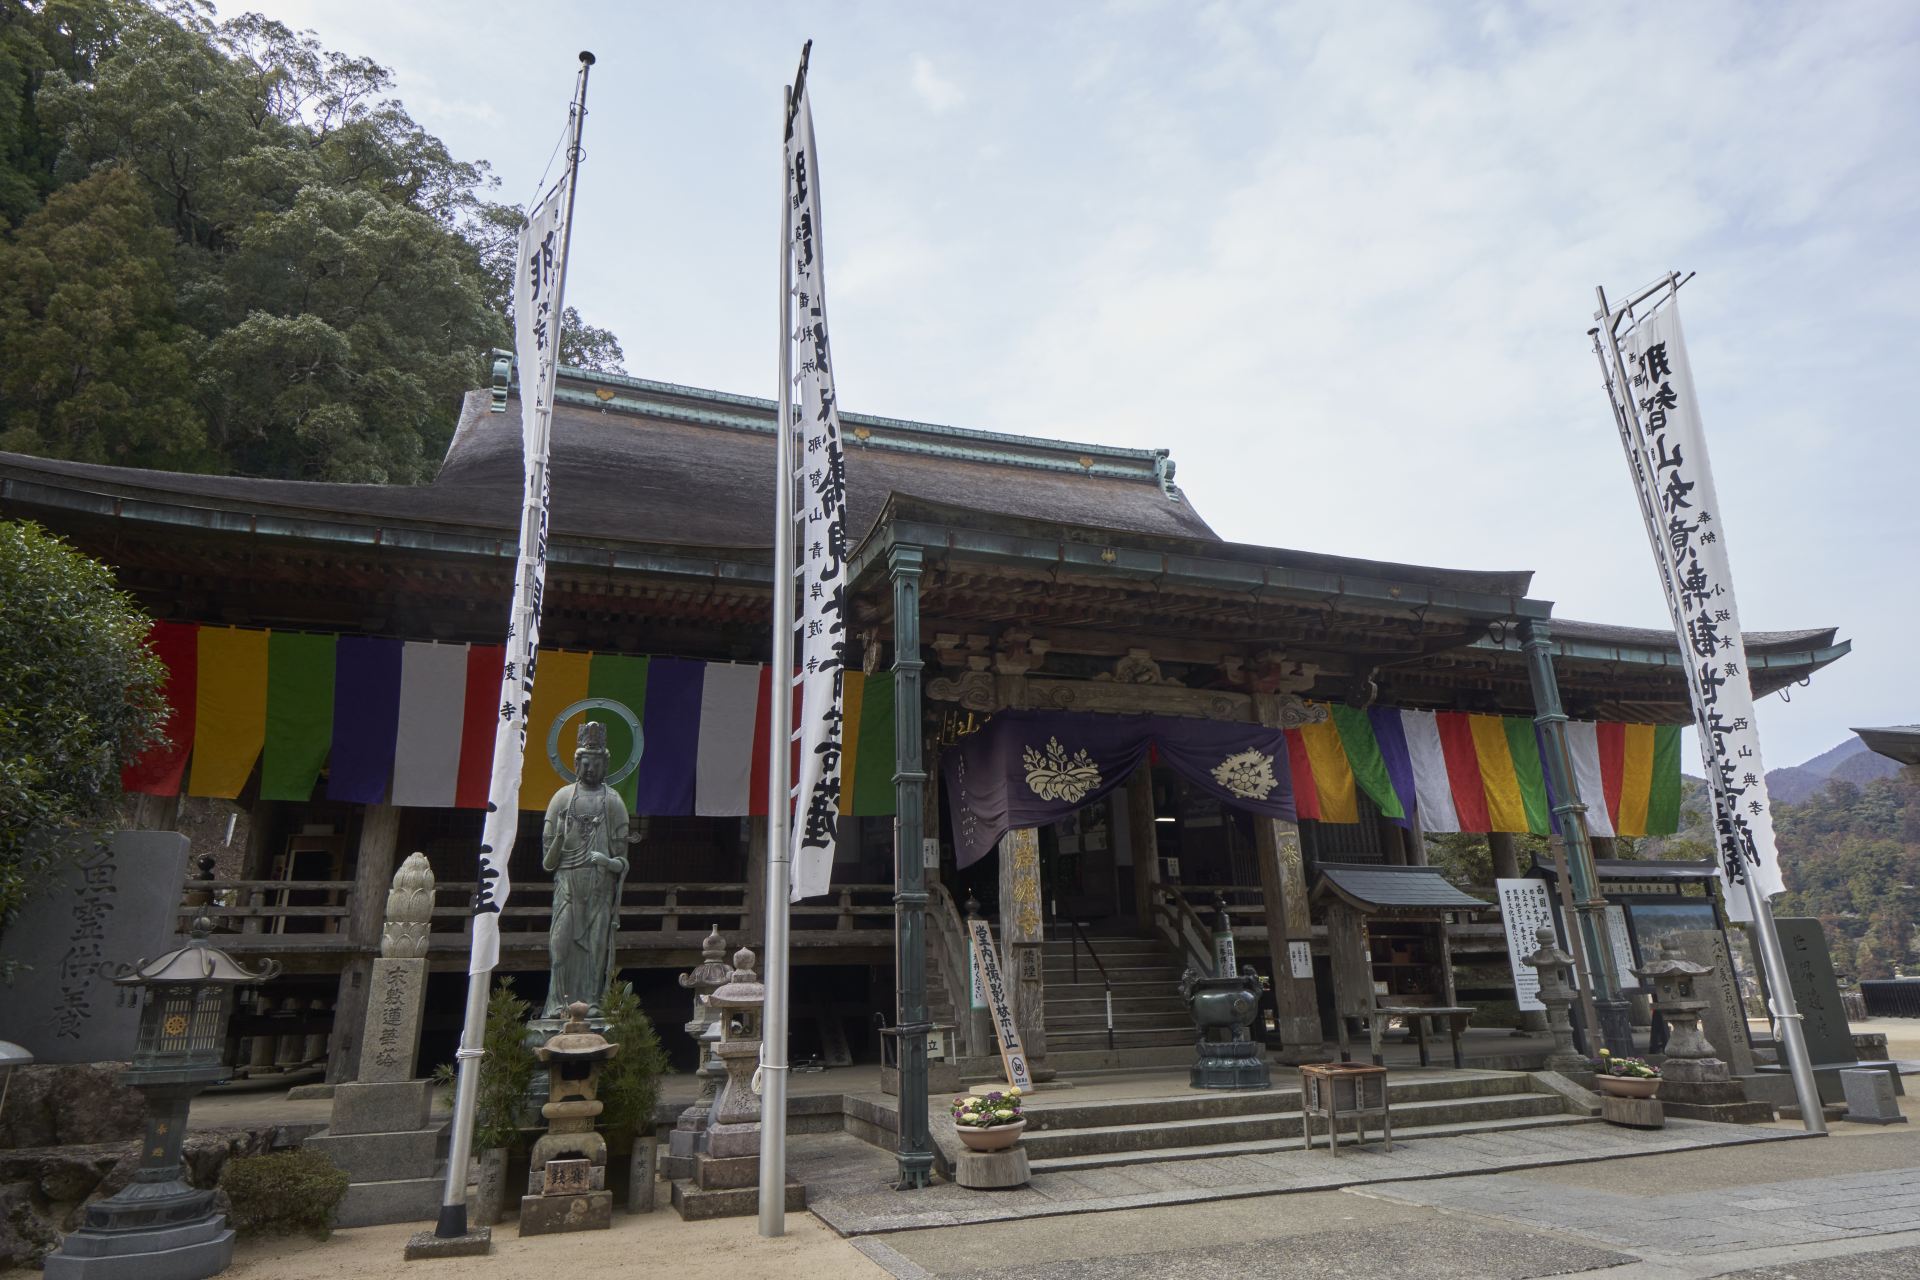 A priest will also explain the relationship with the neighboring Seigantoji Temple.